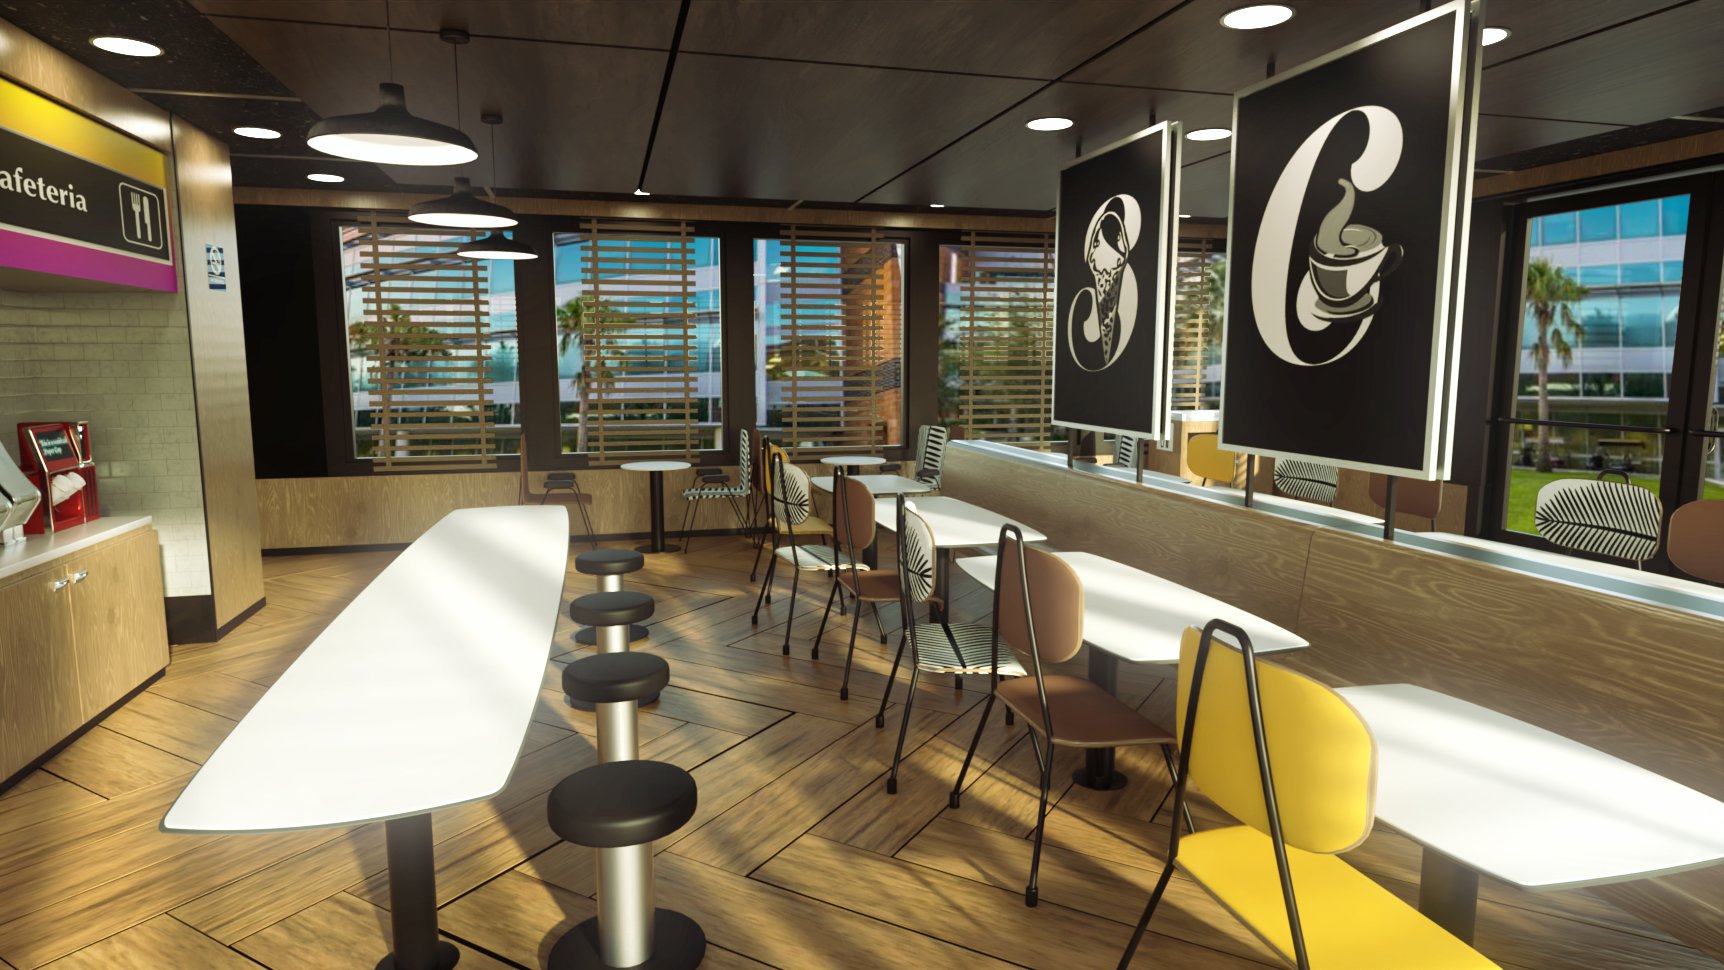 Office Cafeteria by: Digitallab3D, 3D Models by Daz 3D